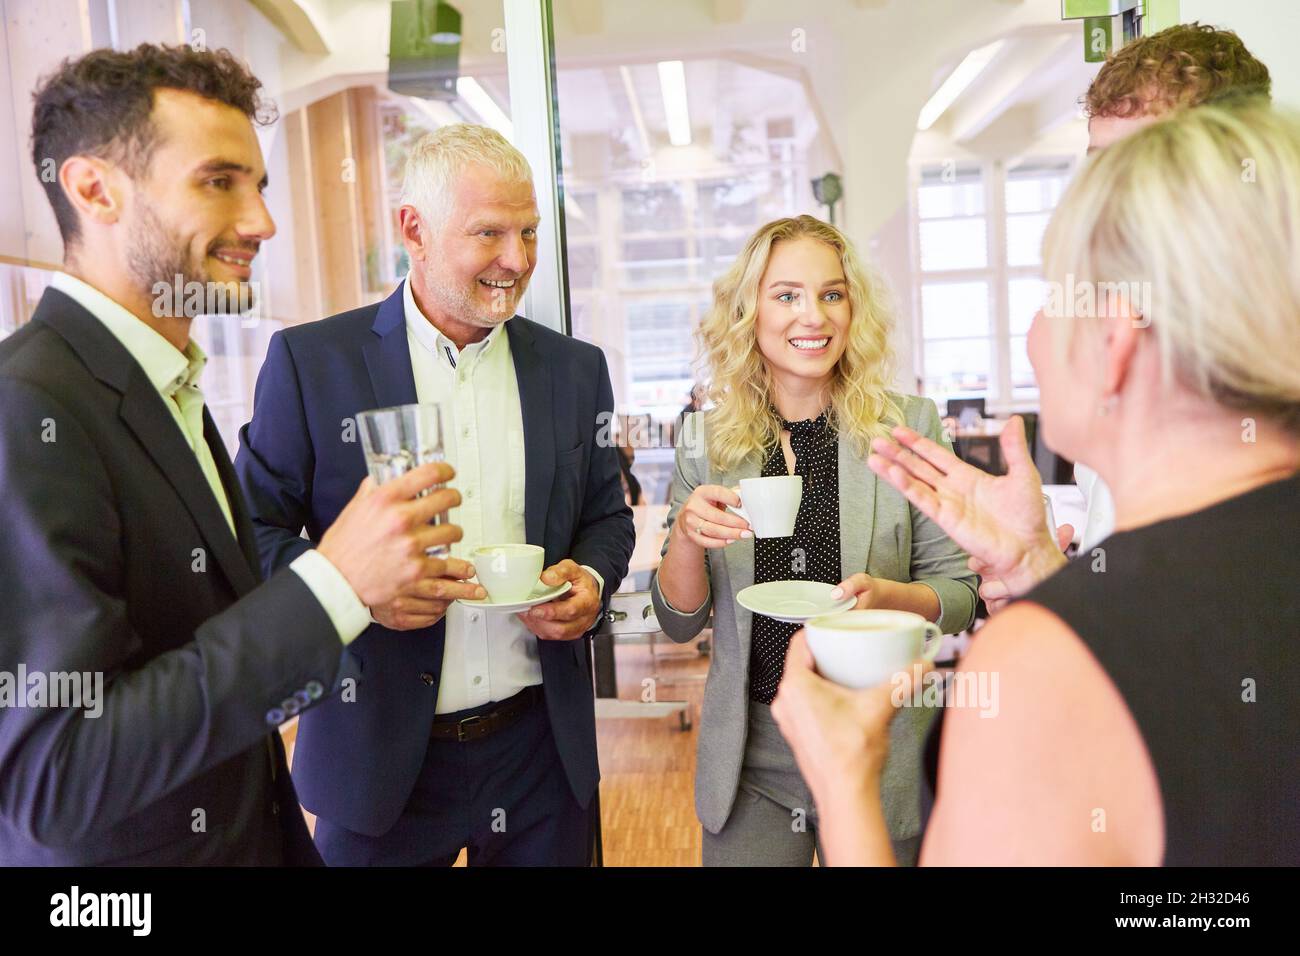 Group of business people having relaxed small talk with the boss during a coffee break Stock Photo